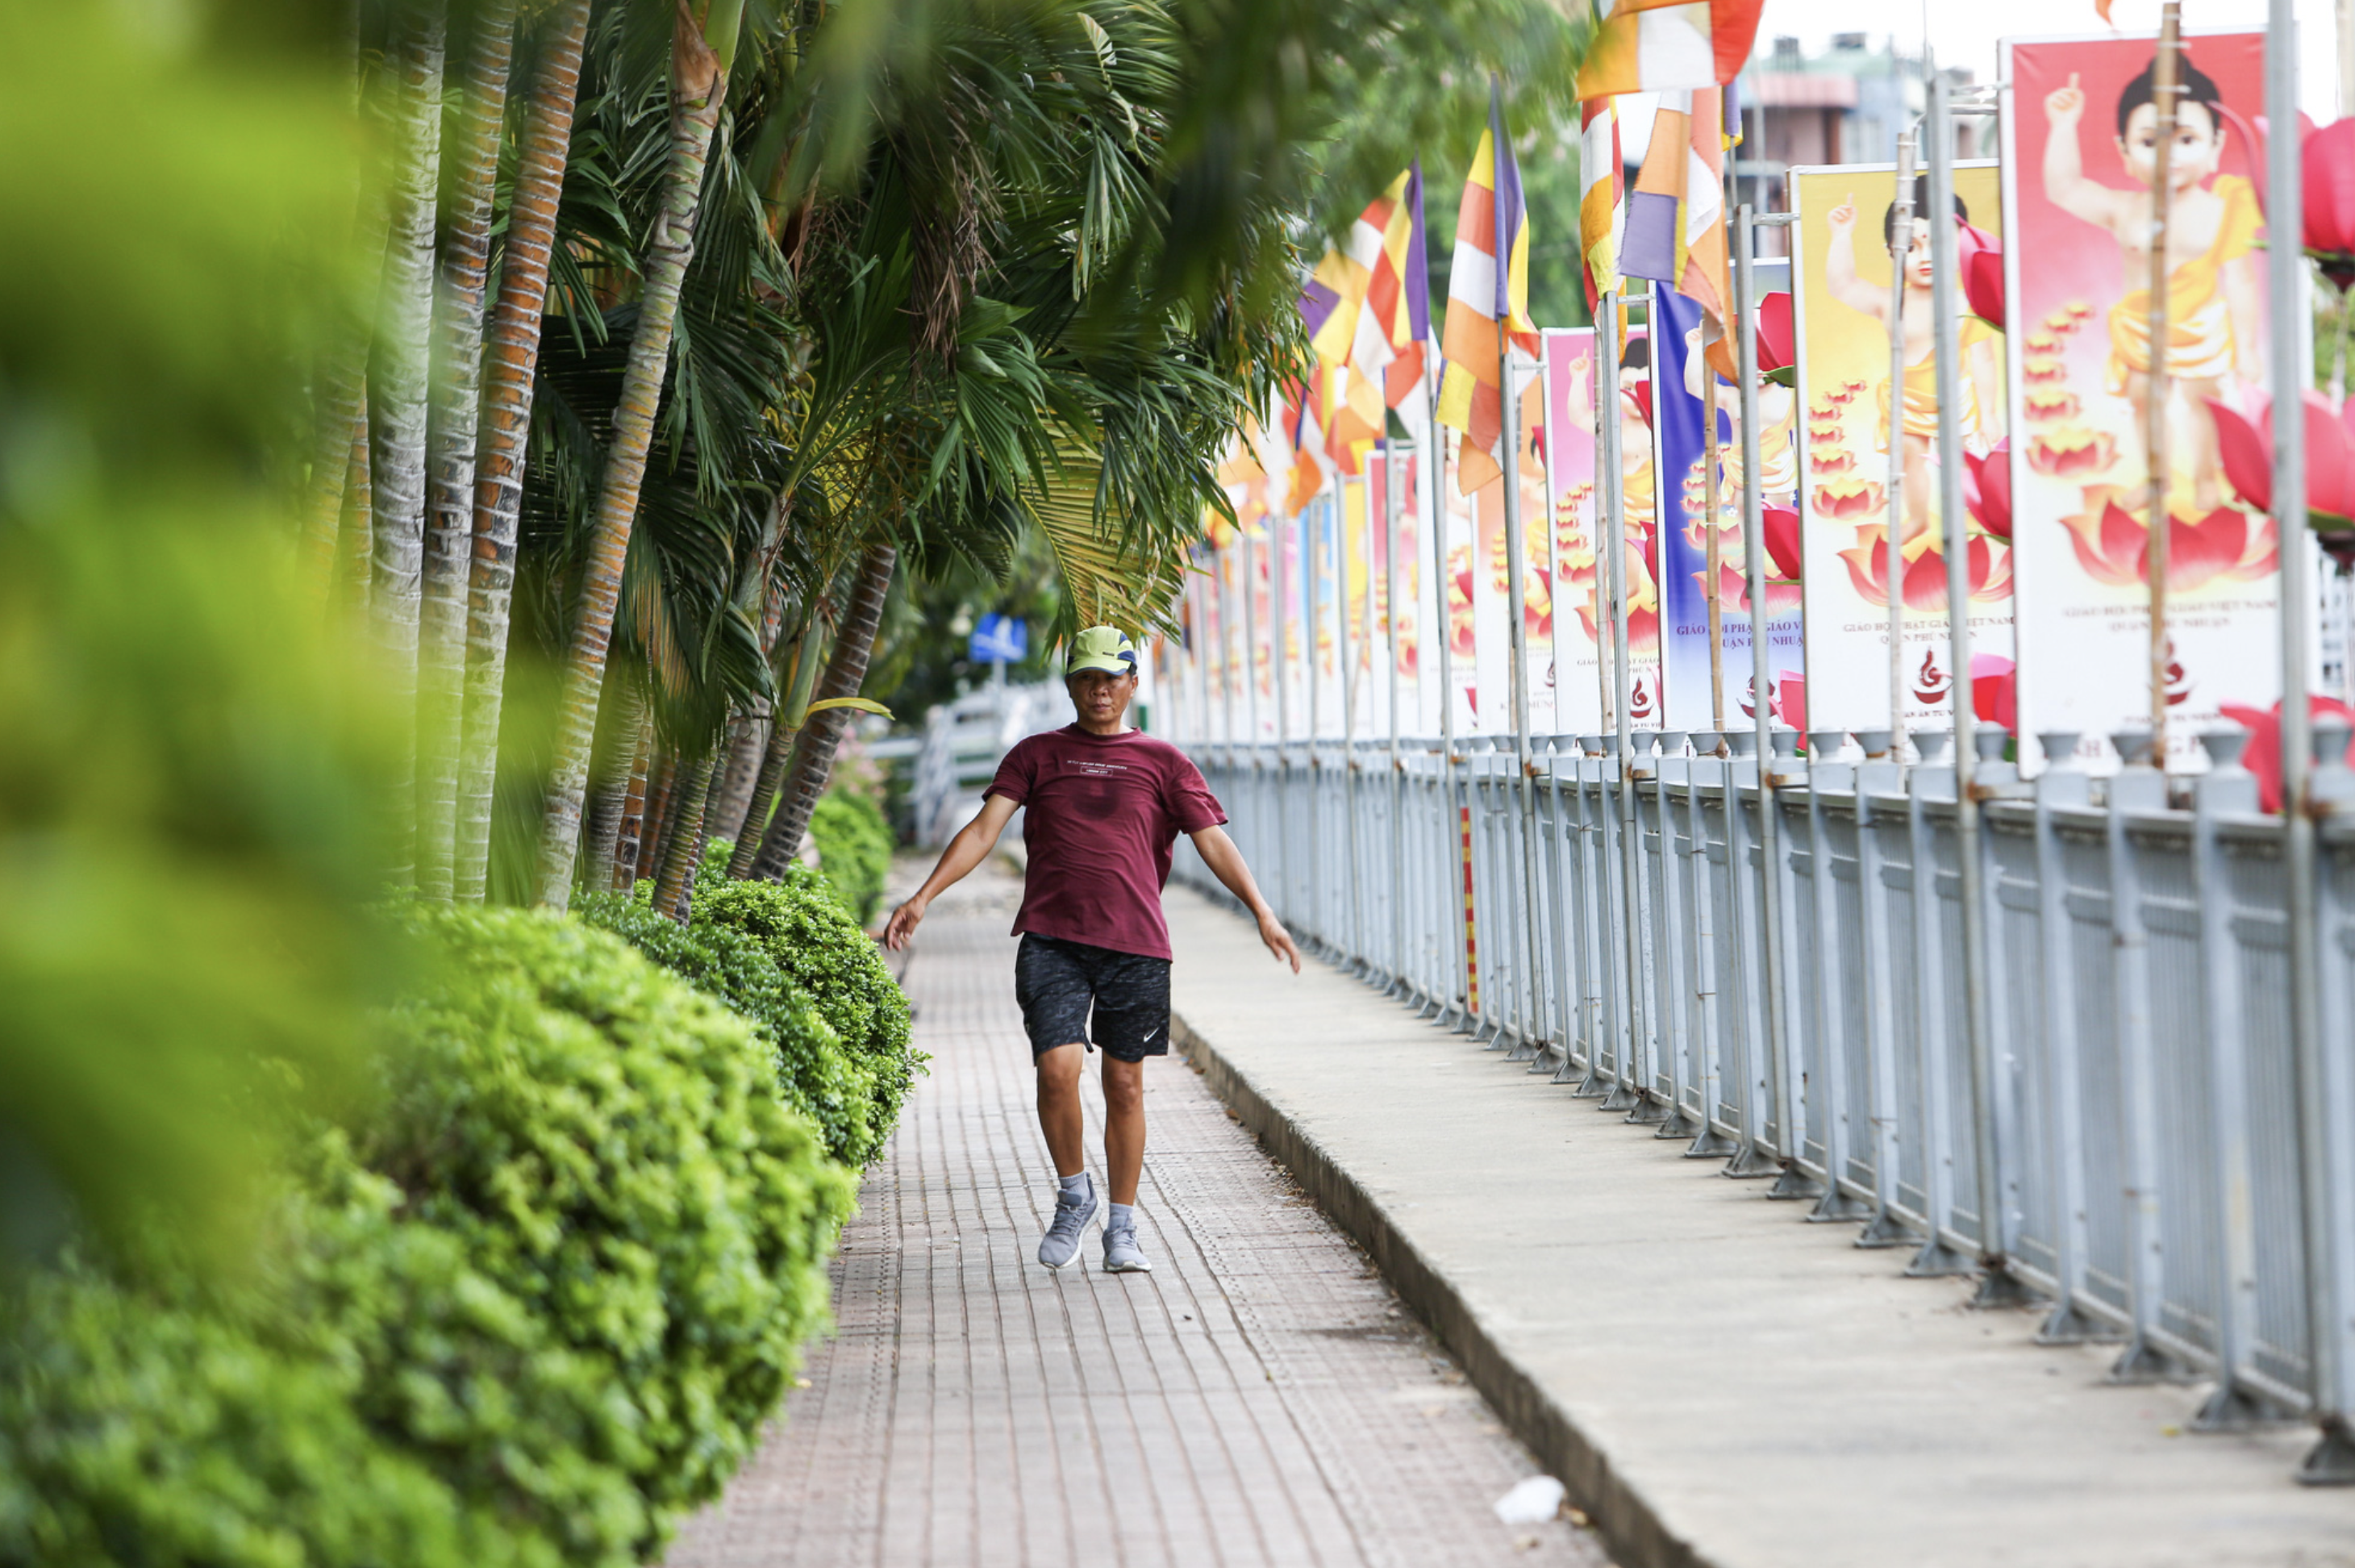 A man does exercise along Nhieu Loc - Thi Nghe Canal strung with colorful Buddhist flags. Photo: Phuong Quyen / Tuoi Tre